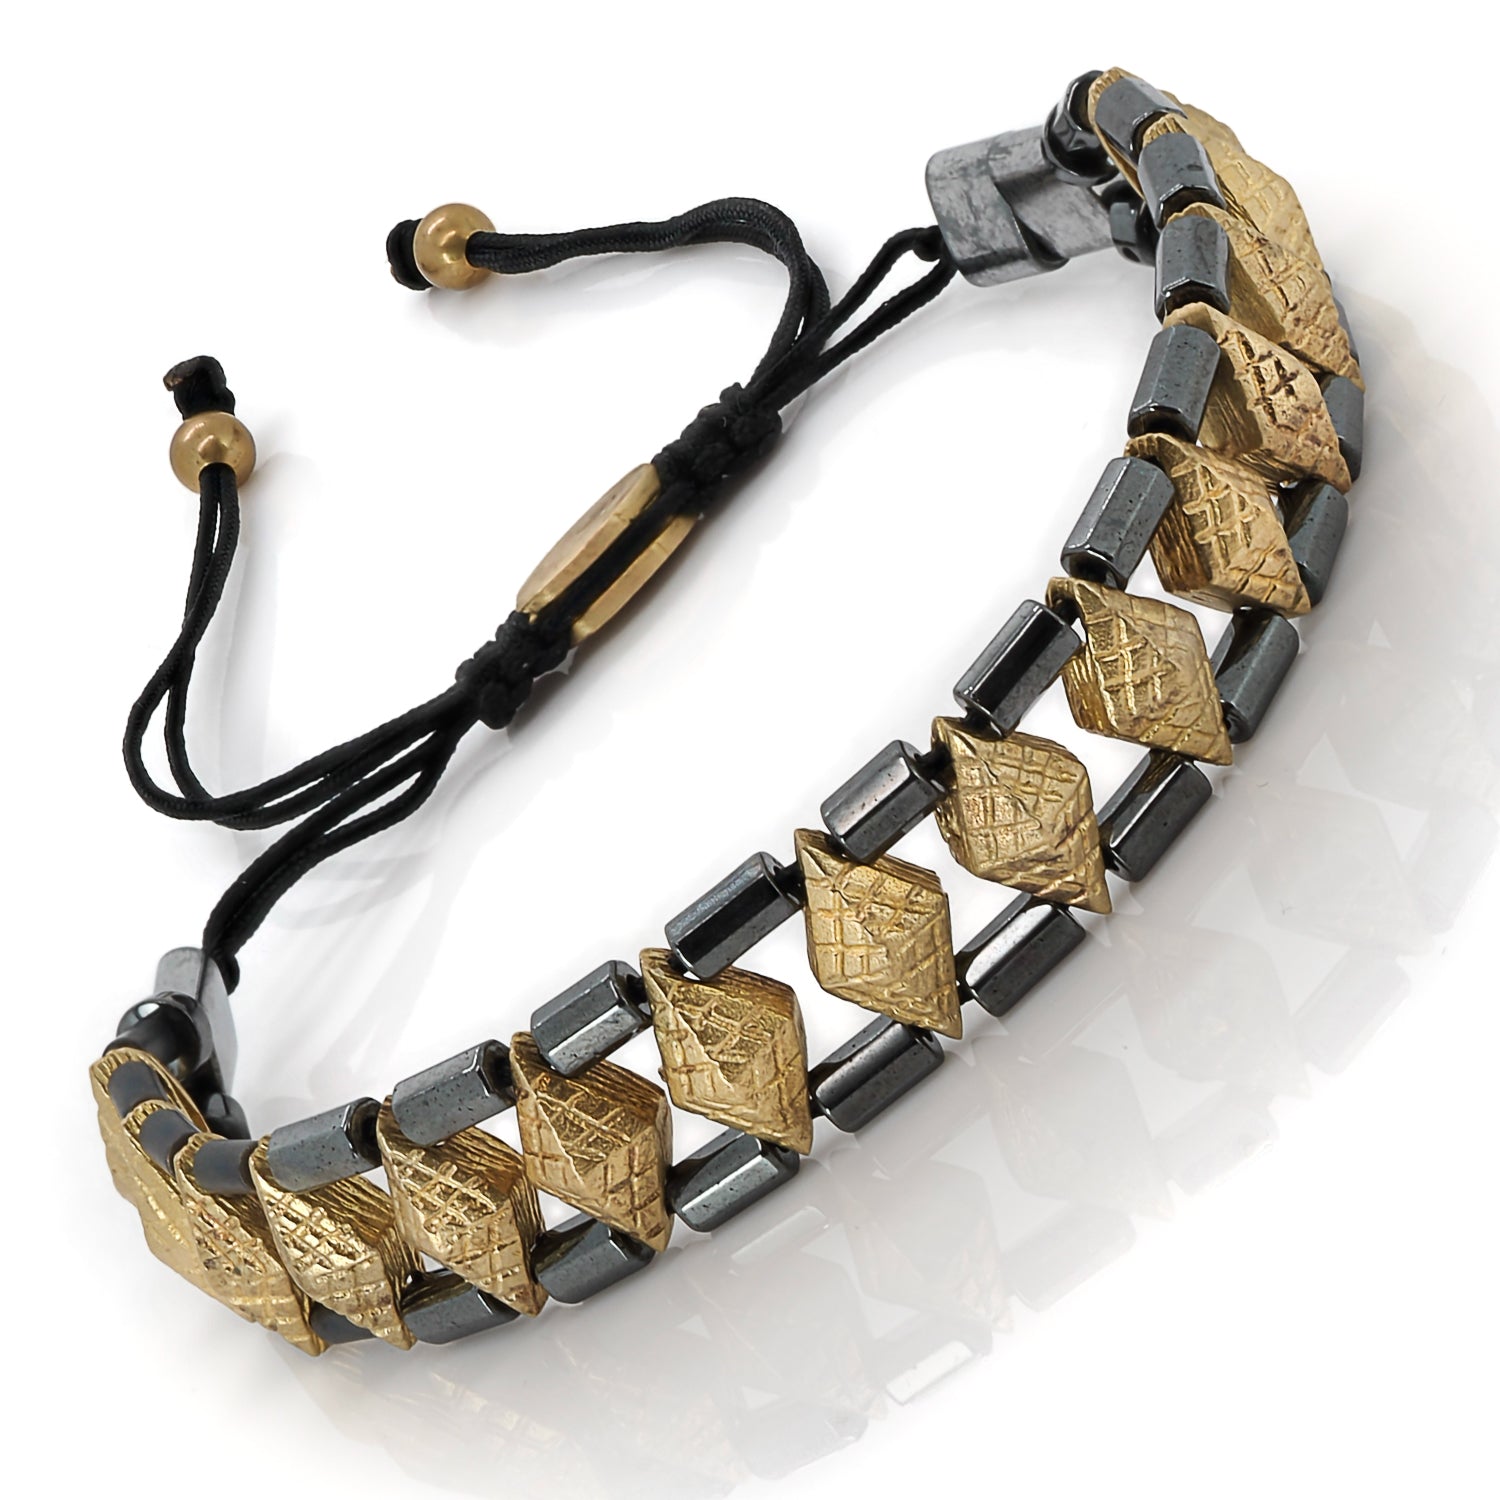 Handmade Hematite and Gold Bracelet - Unisex Design, Your Wearable Source of Grounding and Protection